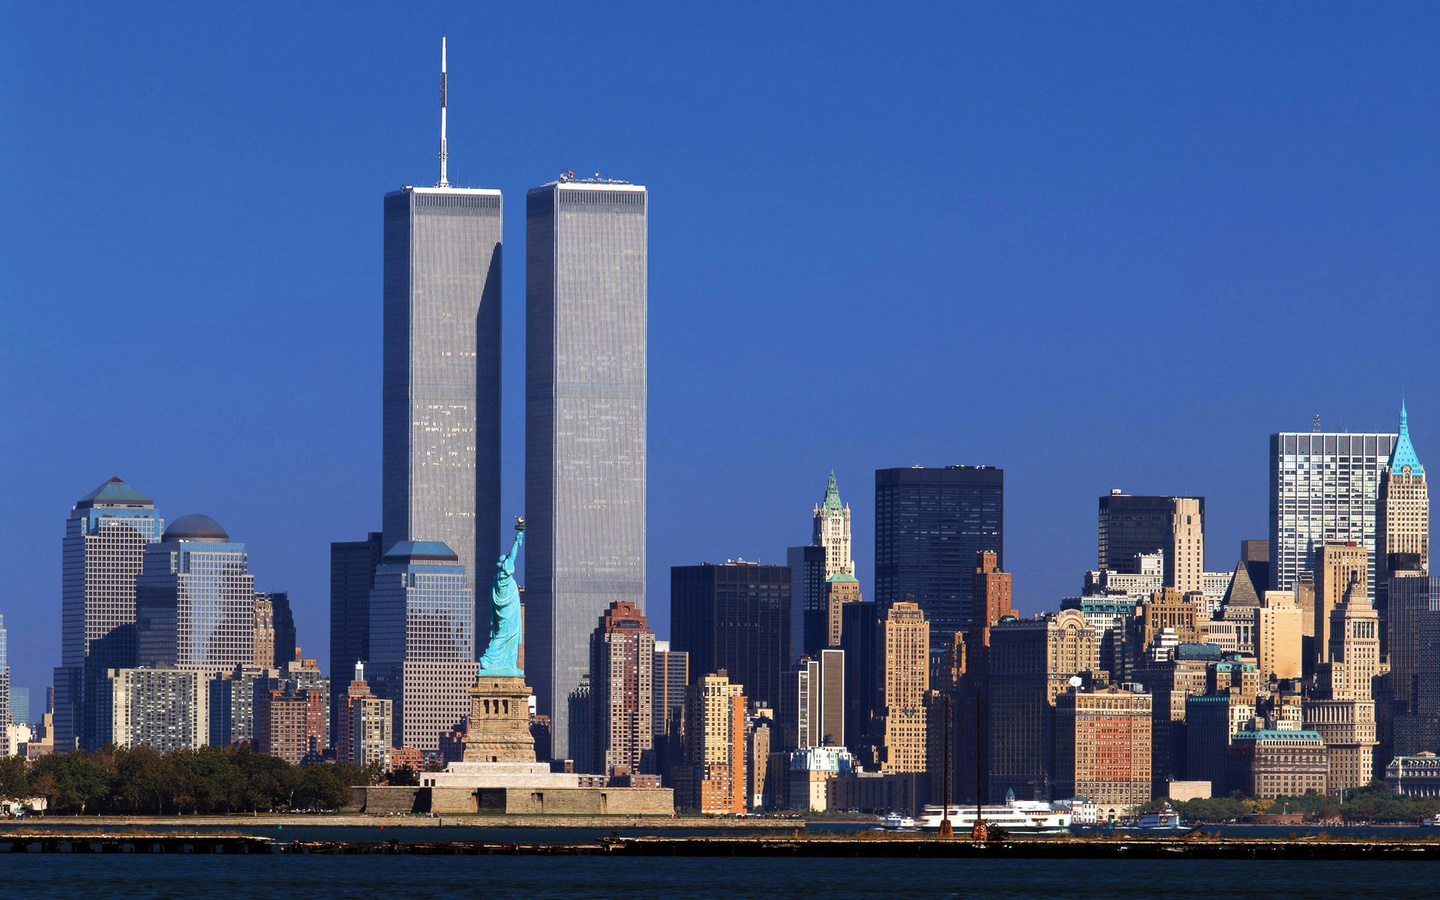 twin towers, -, Wtc, new york, world trade center, -